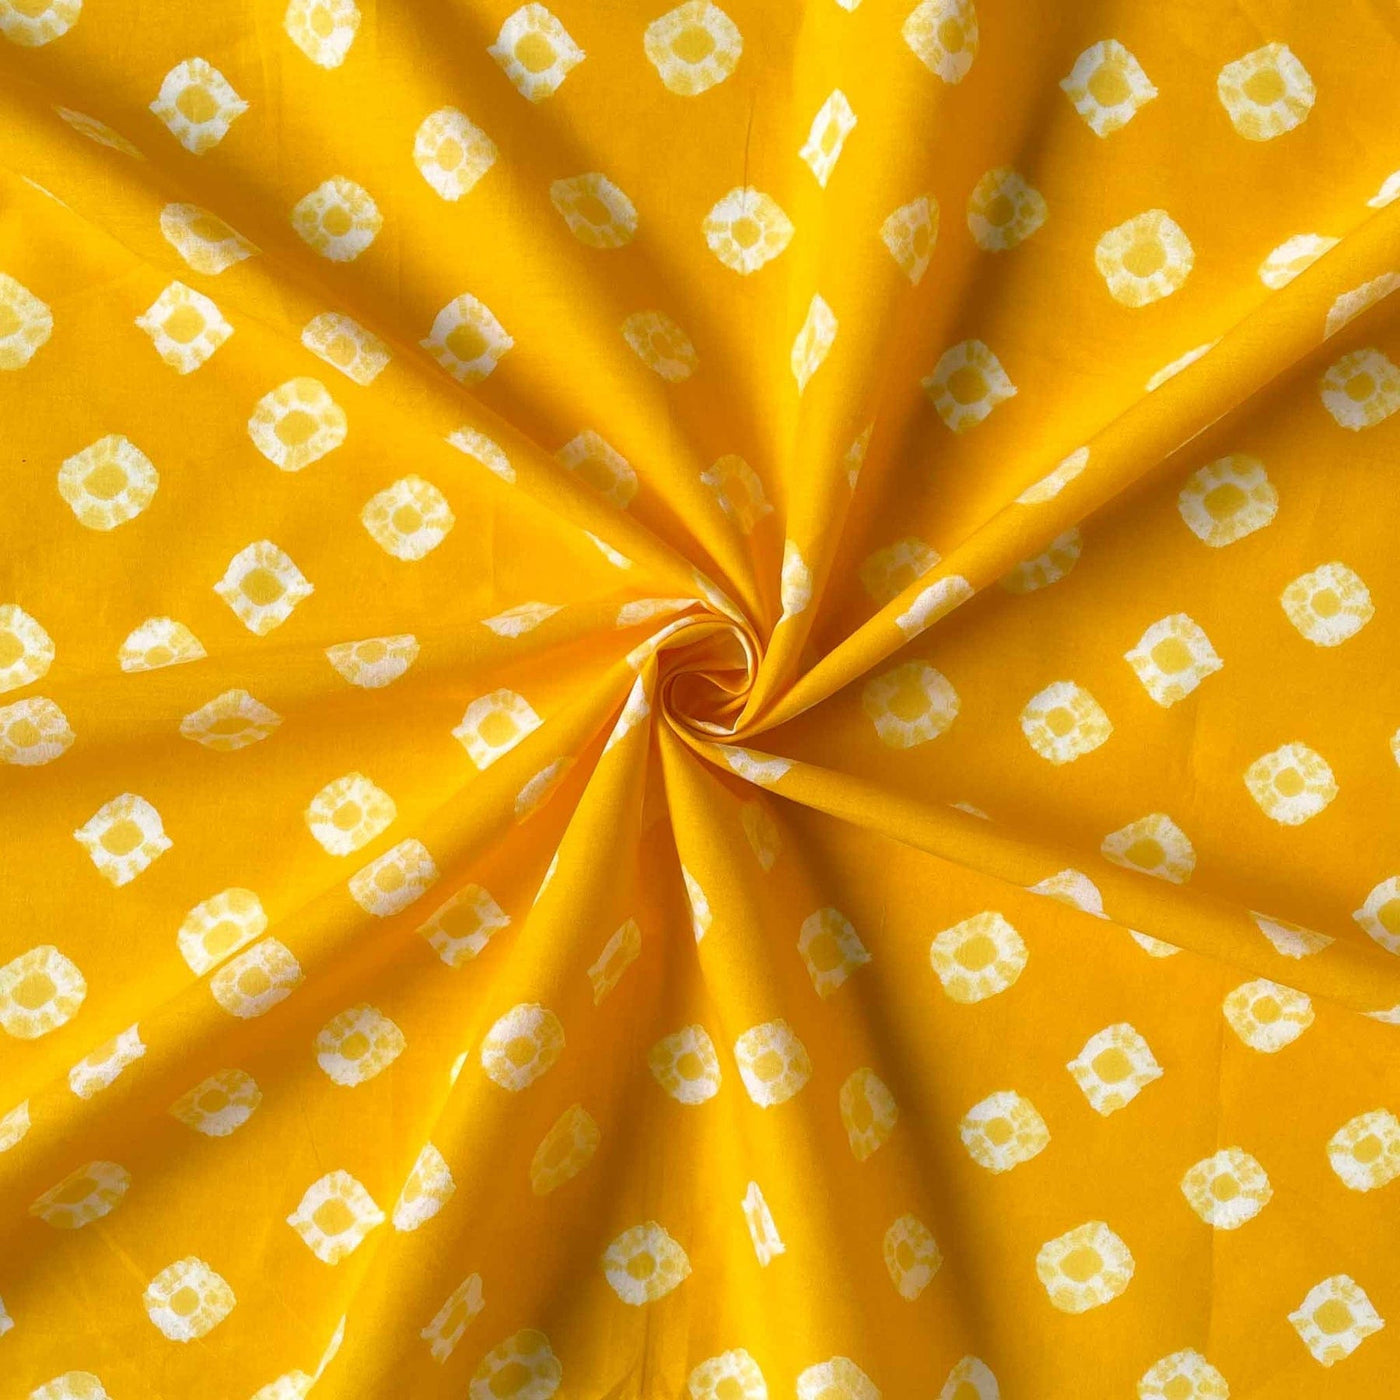 Fabric Pandit Fabric Happy Yellow Batik Natural Dyed Diamond Rings Hand Block Printed Pure Cotton Fabric Width (43 inches)